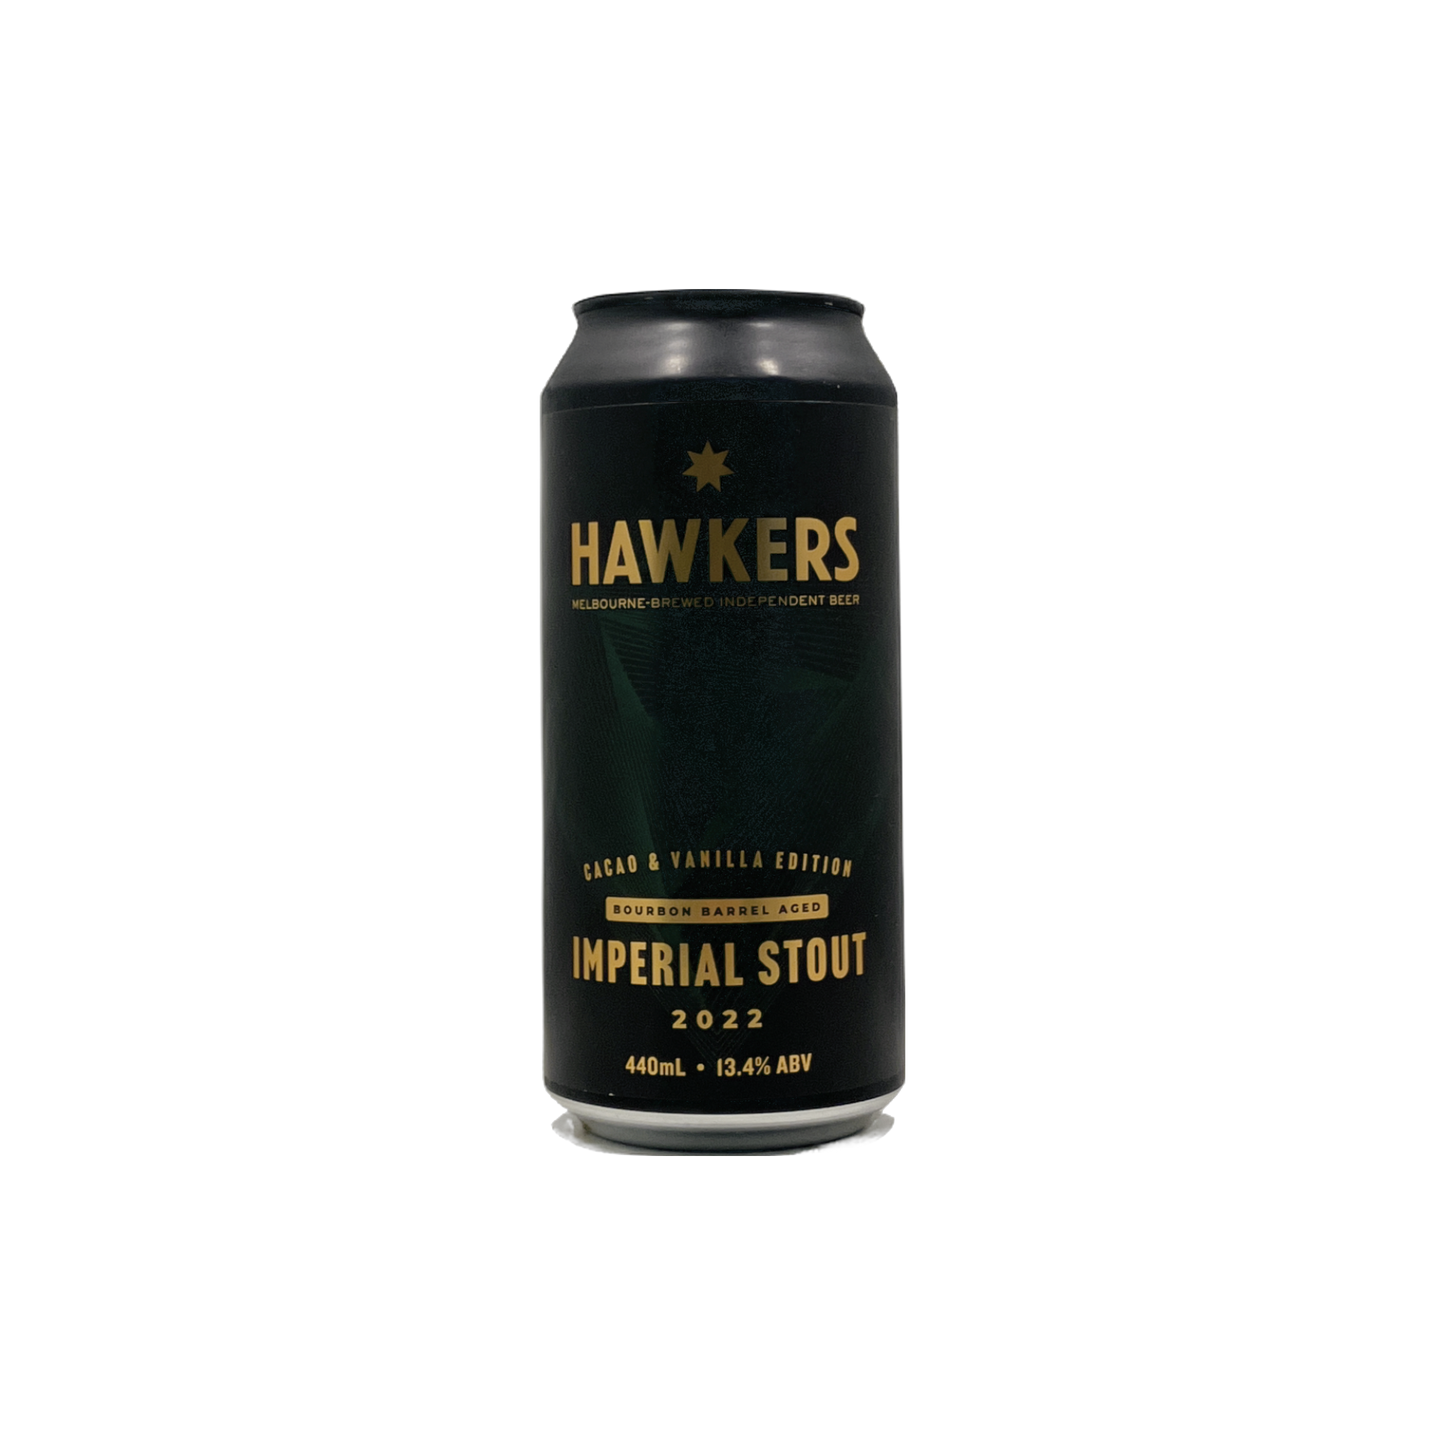 Hawkers Cacao & Vanilla Bourbon Barrel Aged Imperial Stout 2022 440ml